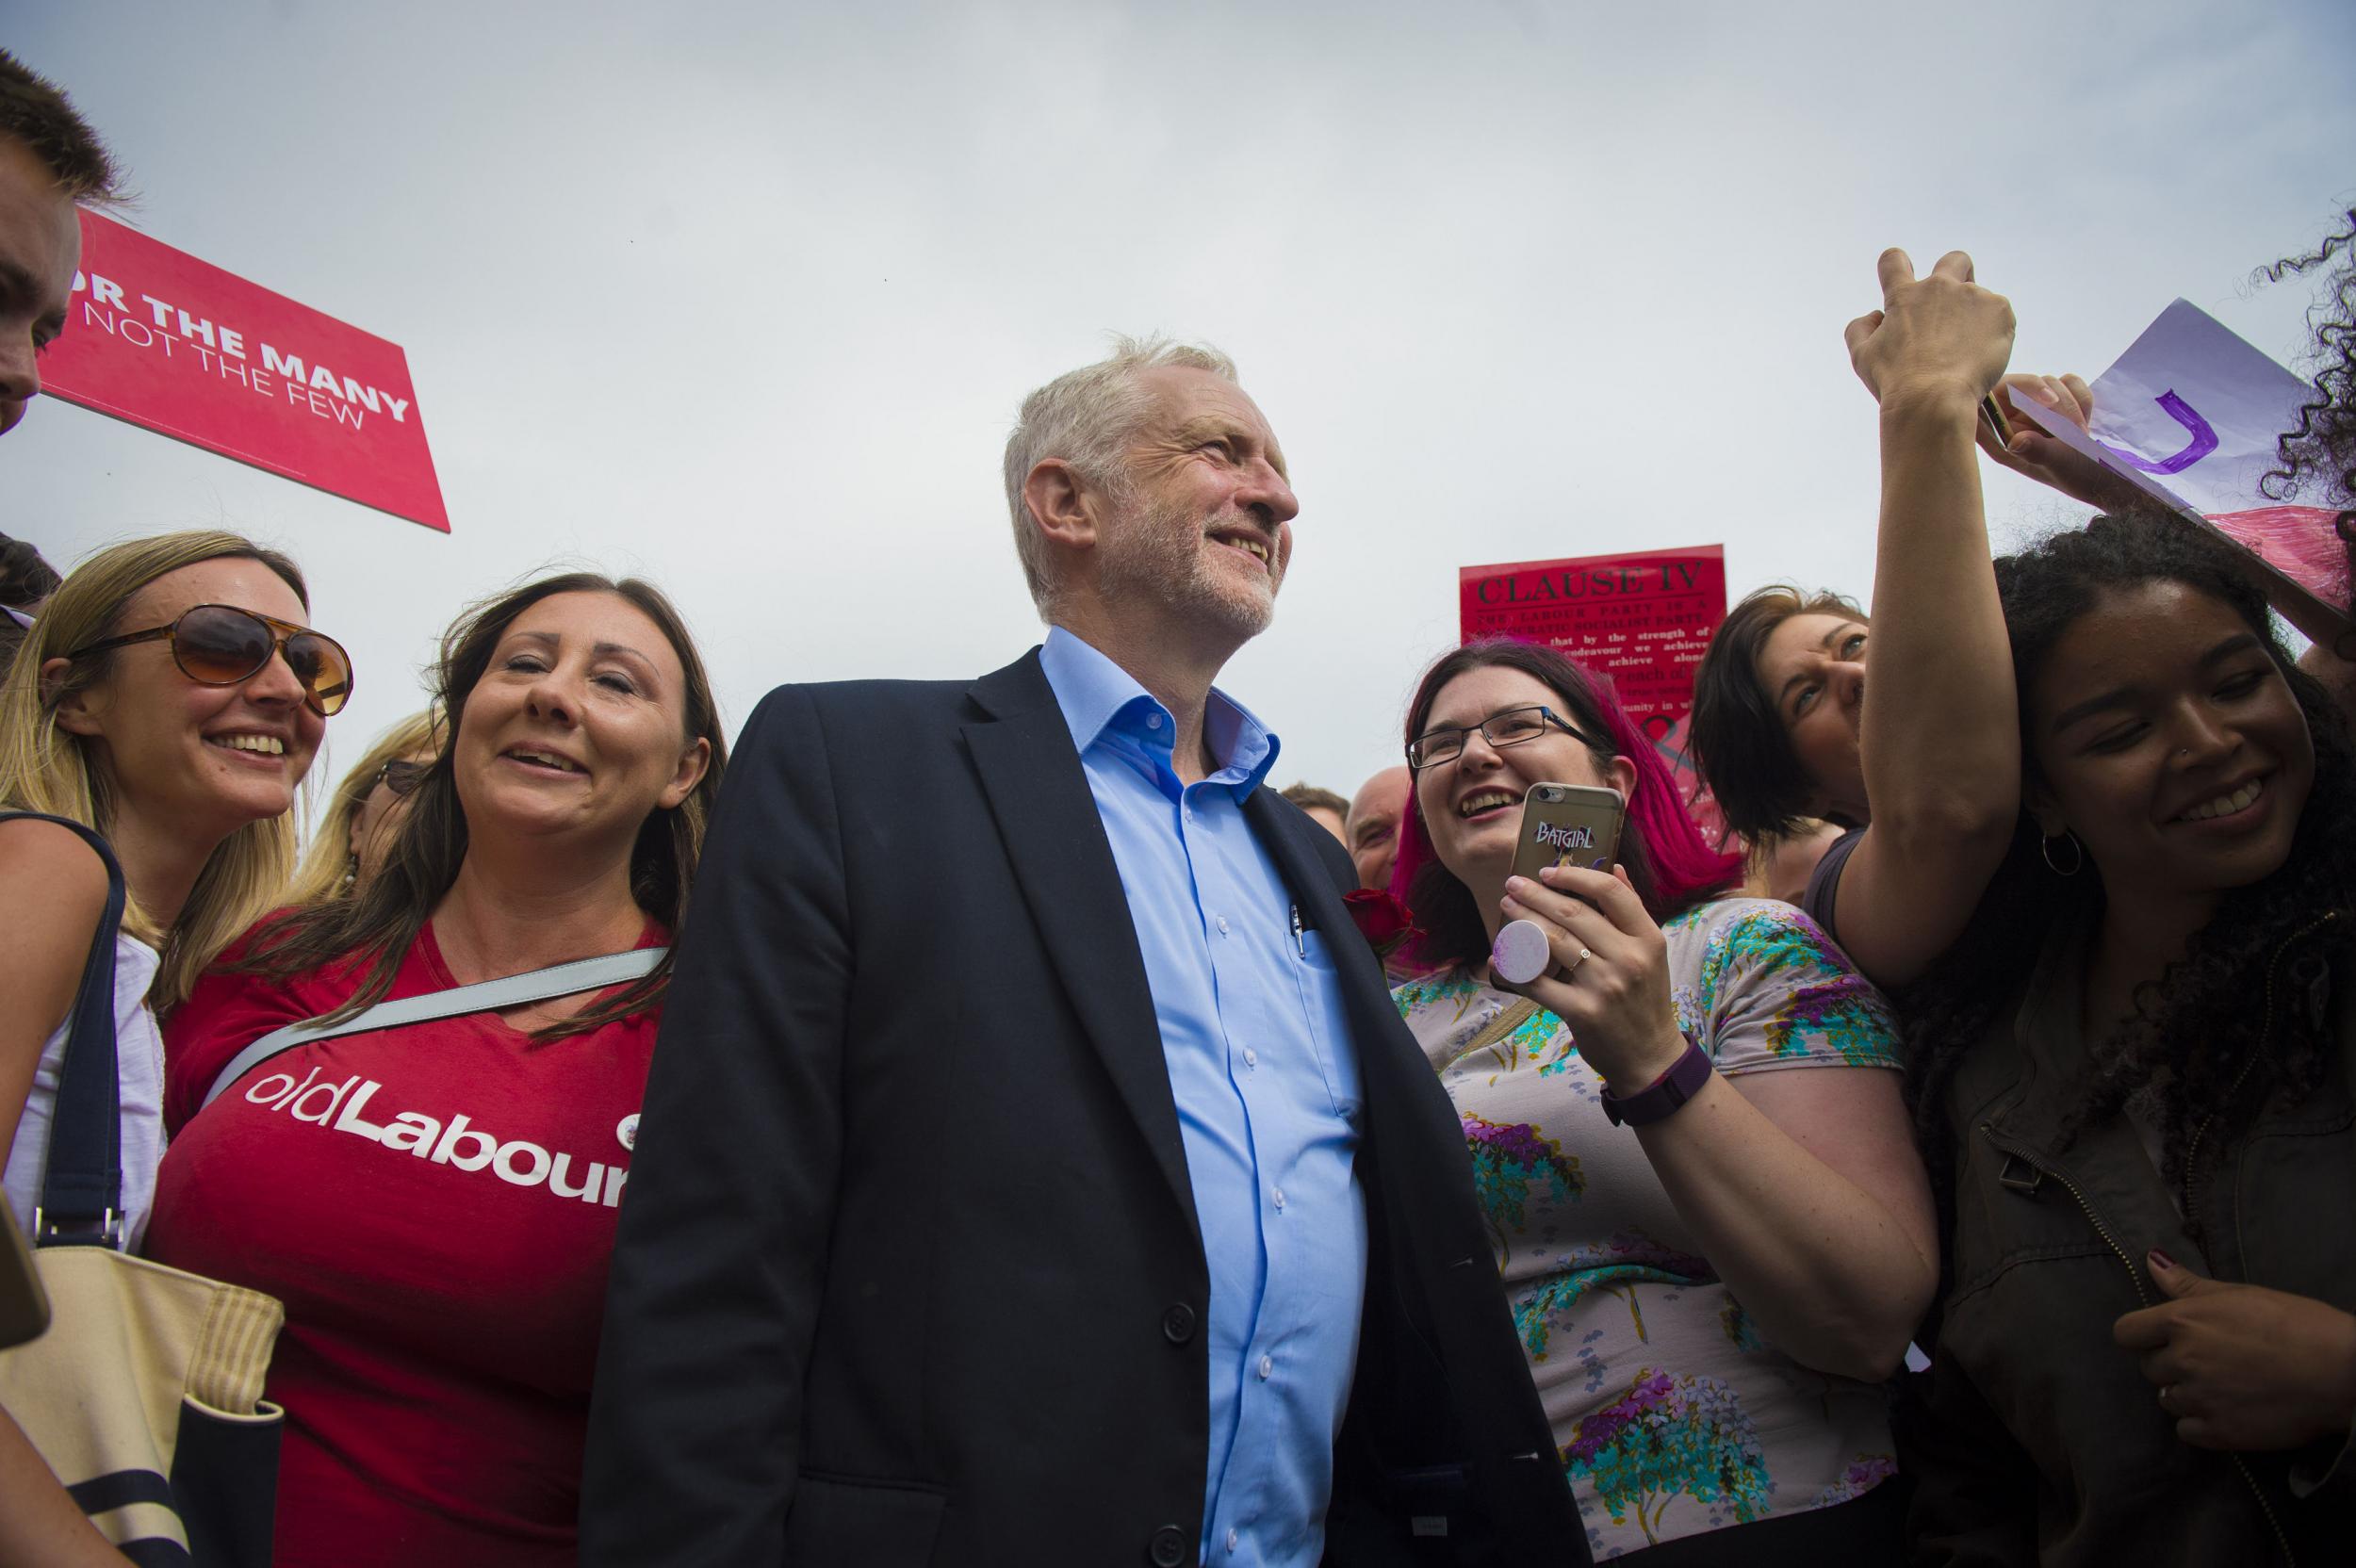 Jeremy Corbyn is greeted by supporters as he visits the West Cliff area of Bournemouth